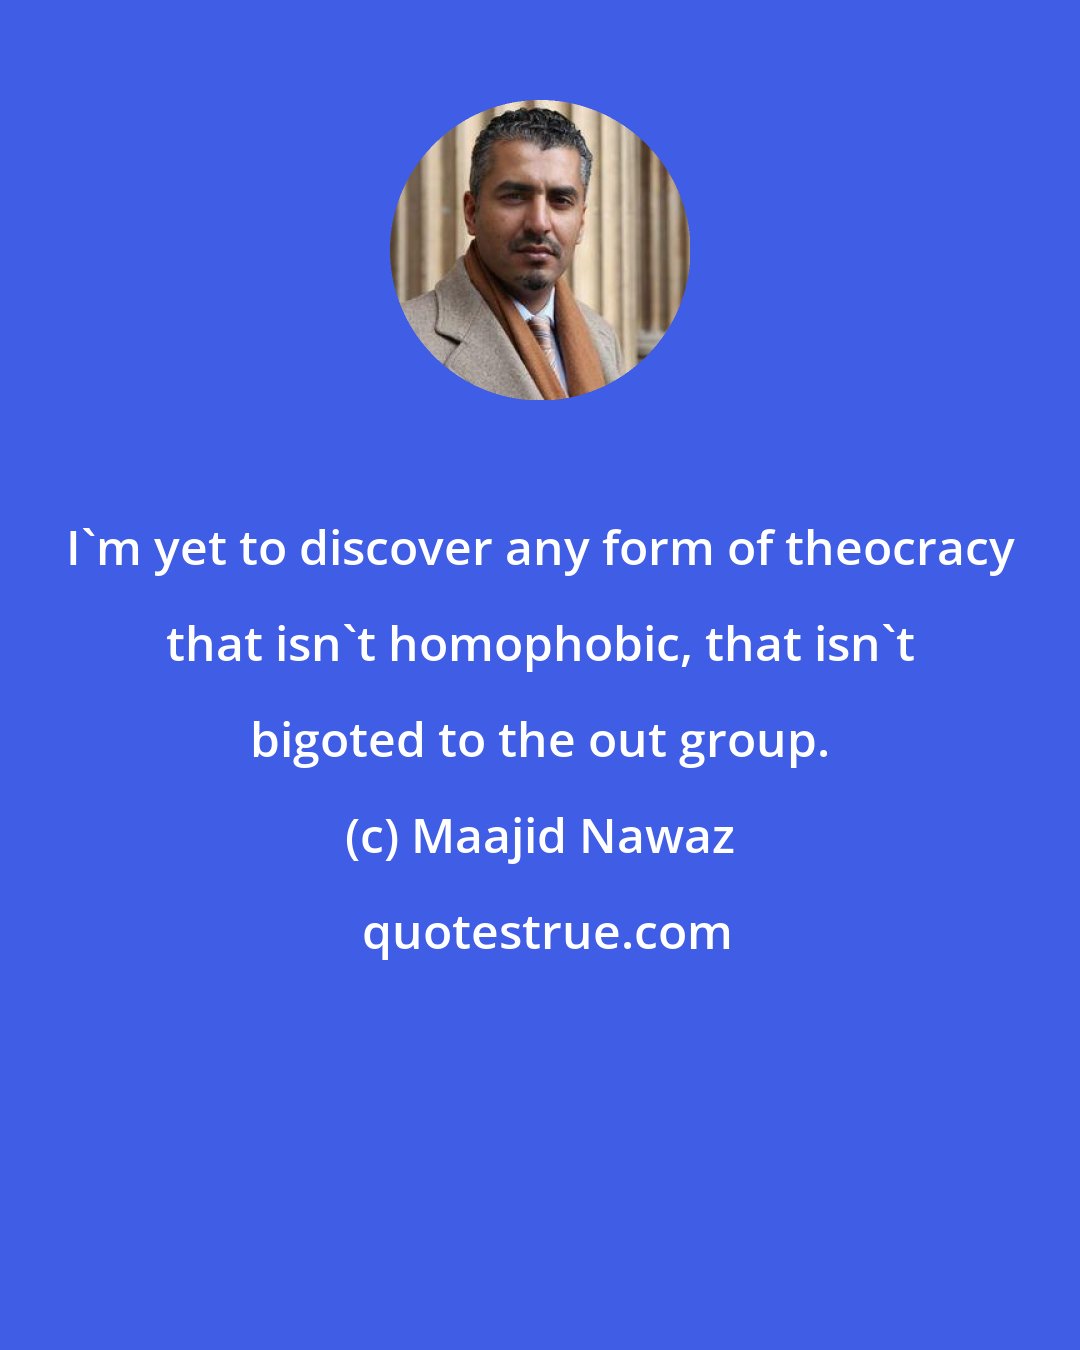 Maajid Nawaz: I'm yet to discover any form of theocracy that isn't homophobic, that isn't bigoted to the out group.